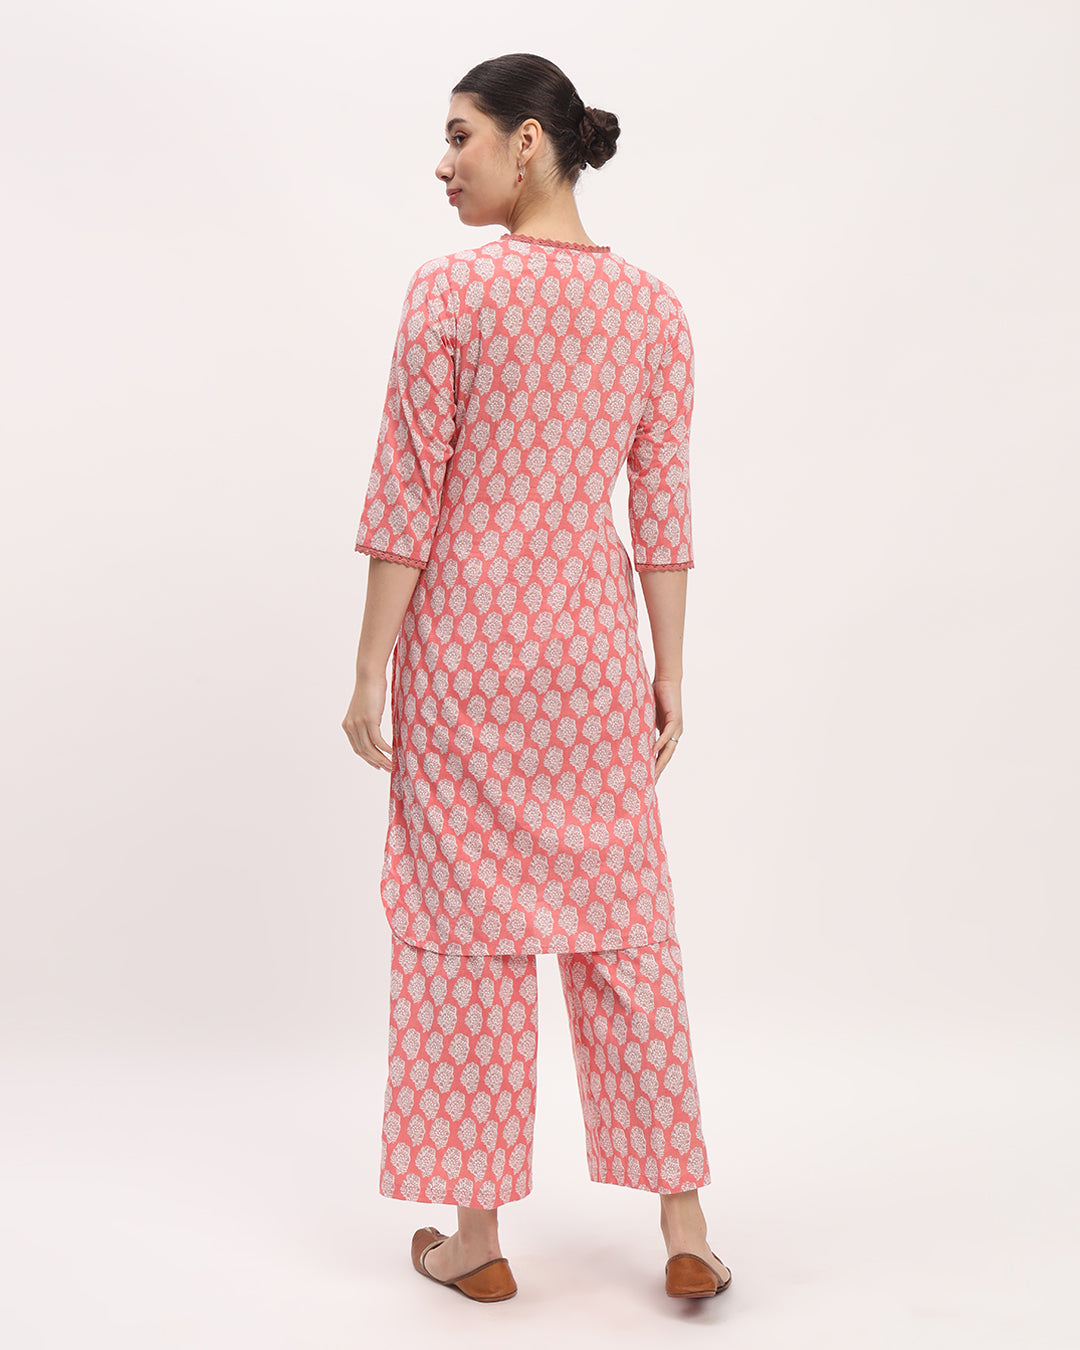 Flora Fables Lace Affair Printed Kurta (Without Bottoms)